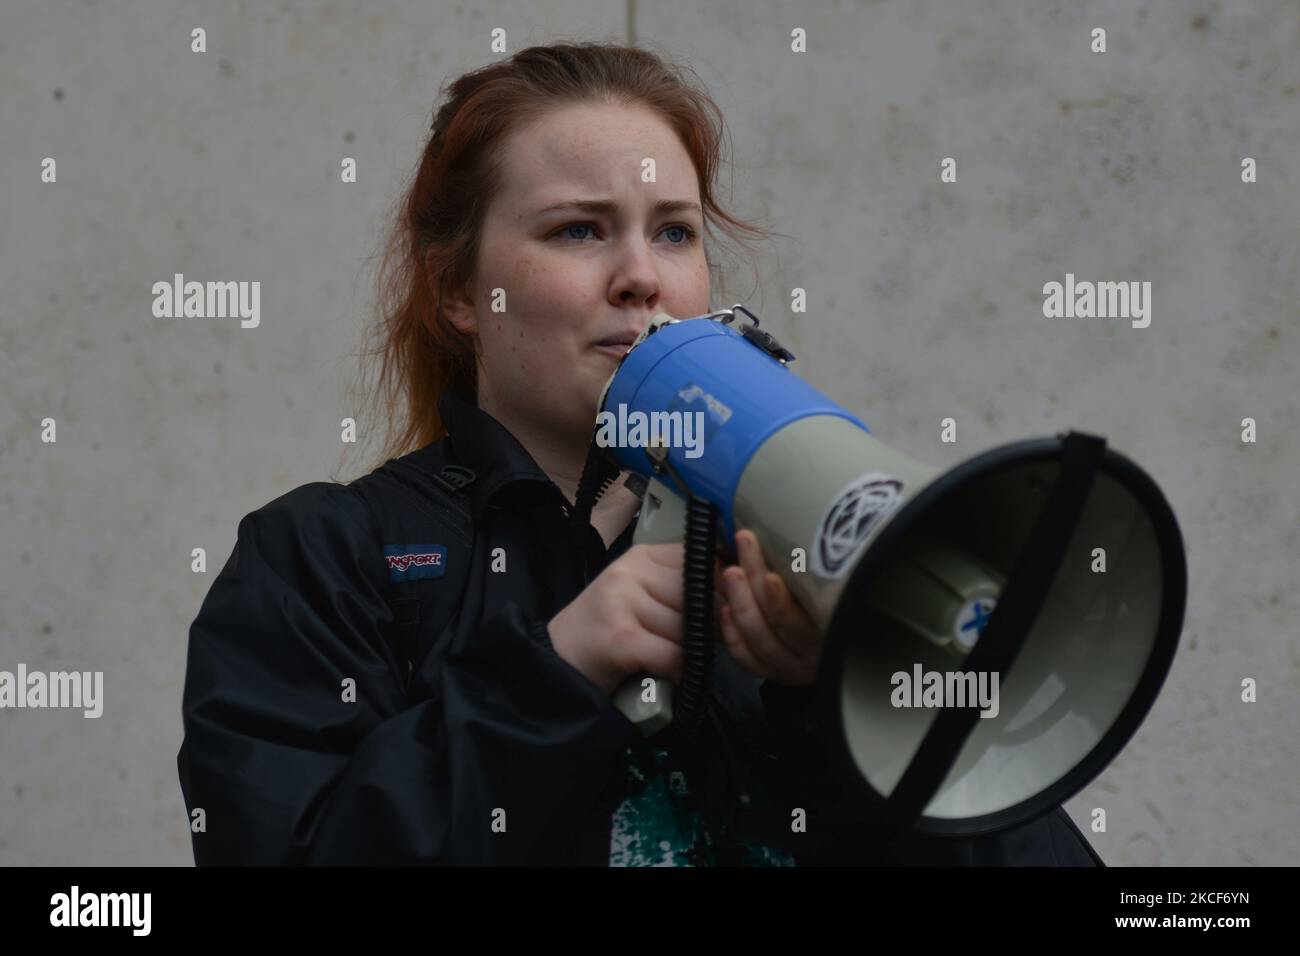 Orla Murphy, addresses the media outside the Criminal Court of Justice in Dublin. Extinction Rebellion activists staged a theatrical protest on the steps of the Criminal Court of Justice in Dublin to show the injustice of climate inaction as 20-year-old Orla Murphy, a climate activist, appears in court for criminal damages. On Tuesday, May 25, 2021, in Dublin, Ireland. (Photo by Artur Widak/NurPhoto) Stock Photo